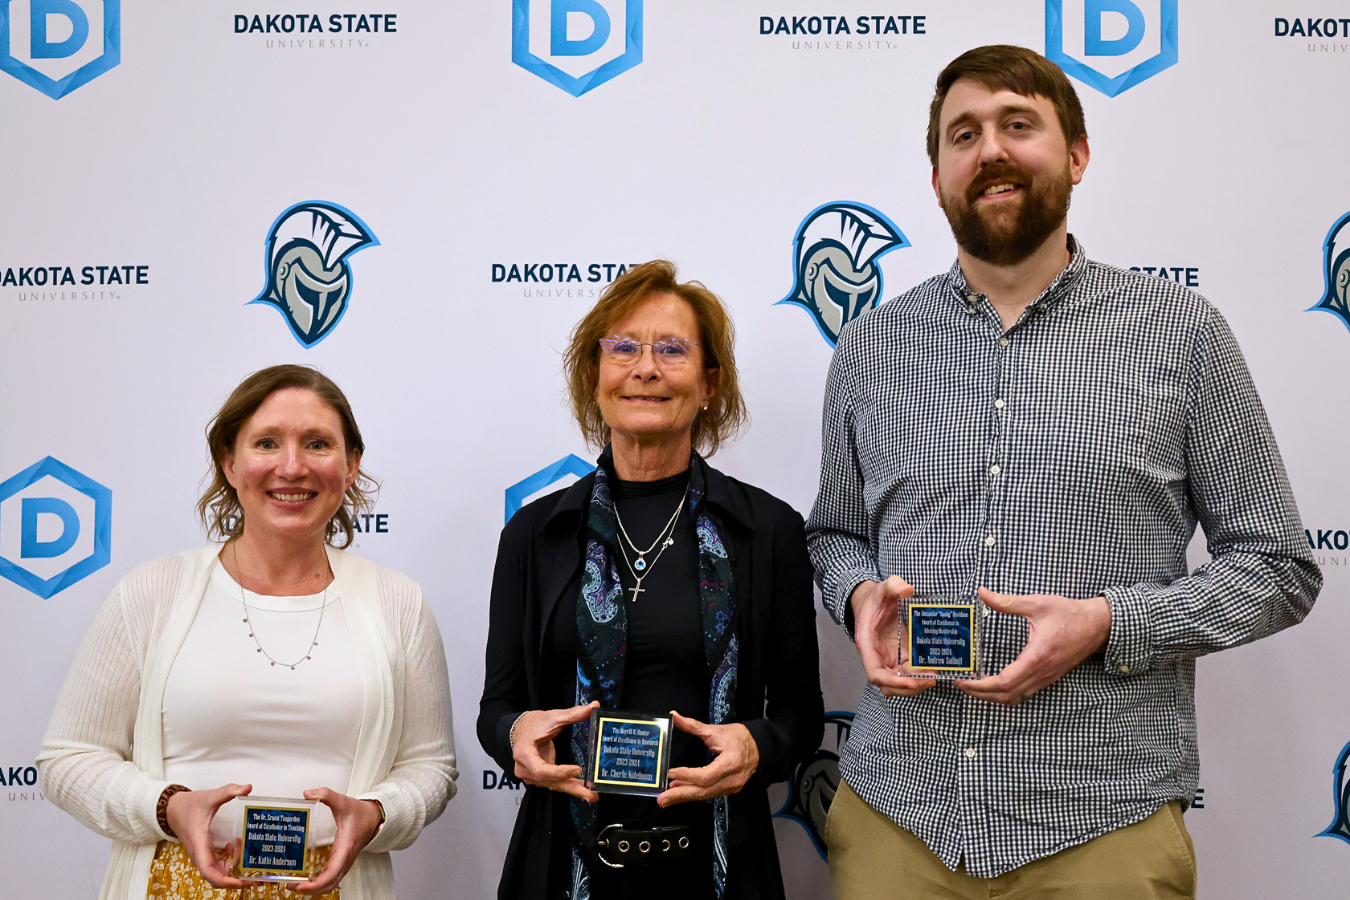 Dakota State’s faculty award winners for the 2022-2023 academic year include: Dr. Katie Anderson (left), Dr. Cherie Noteboom, and Dr. Andrew Sathoff.